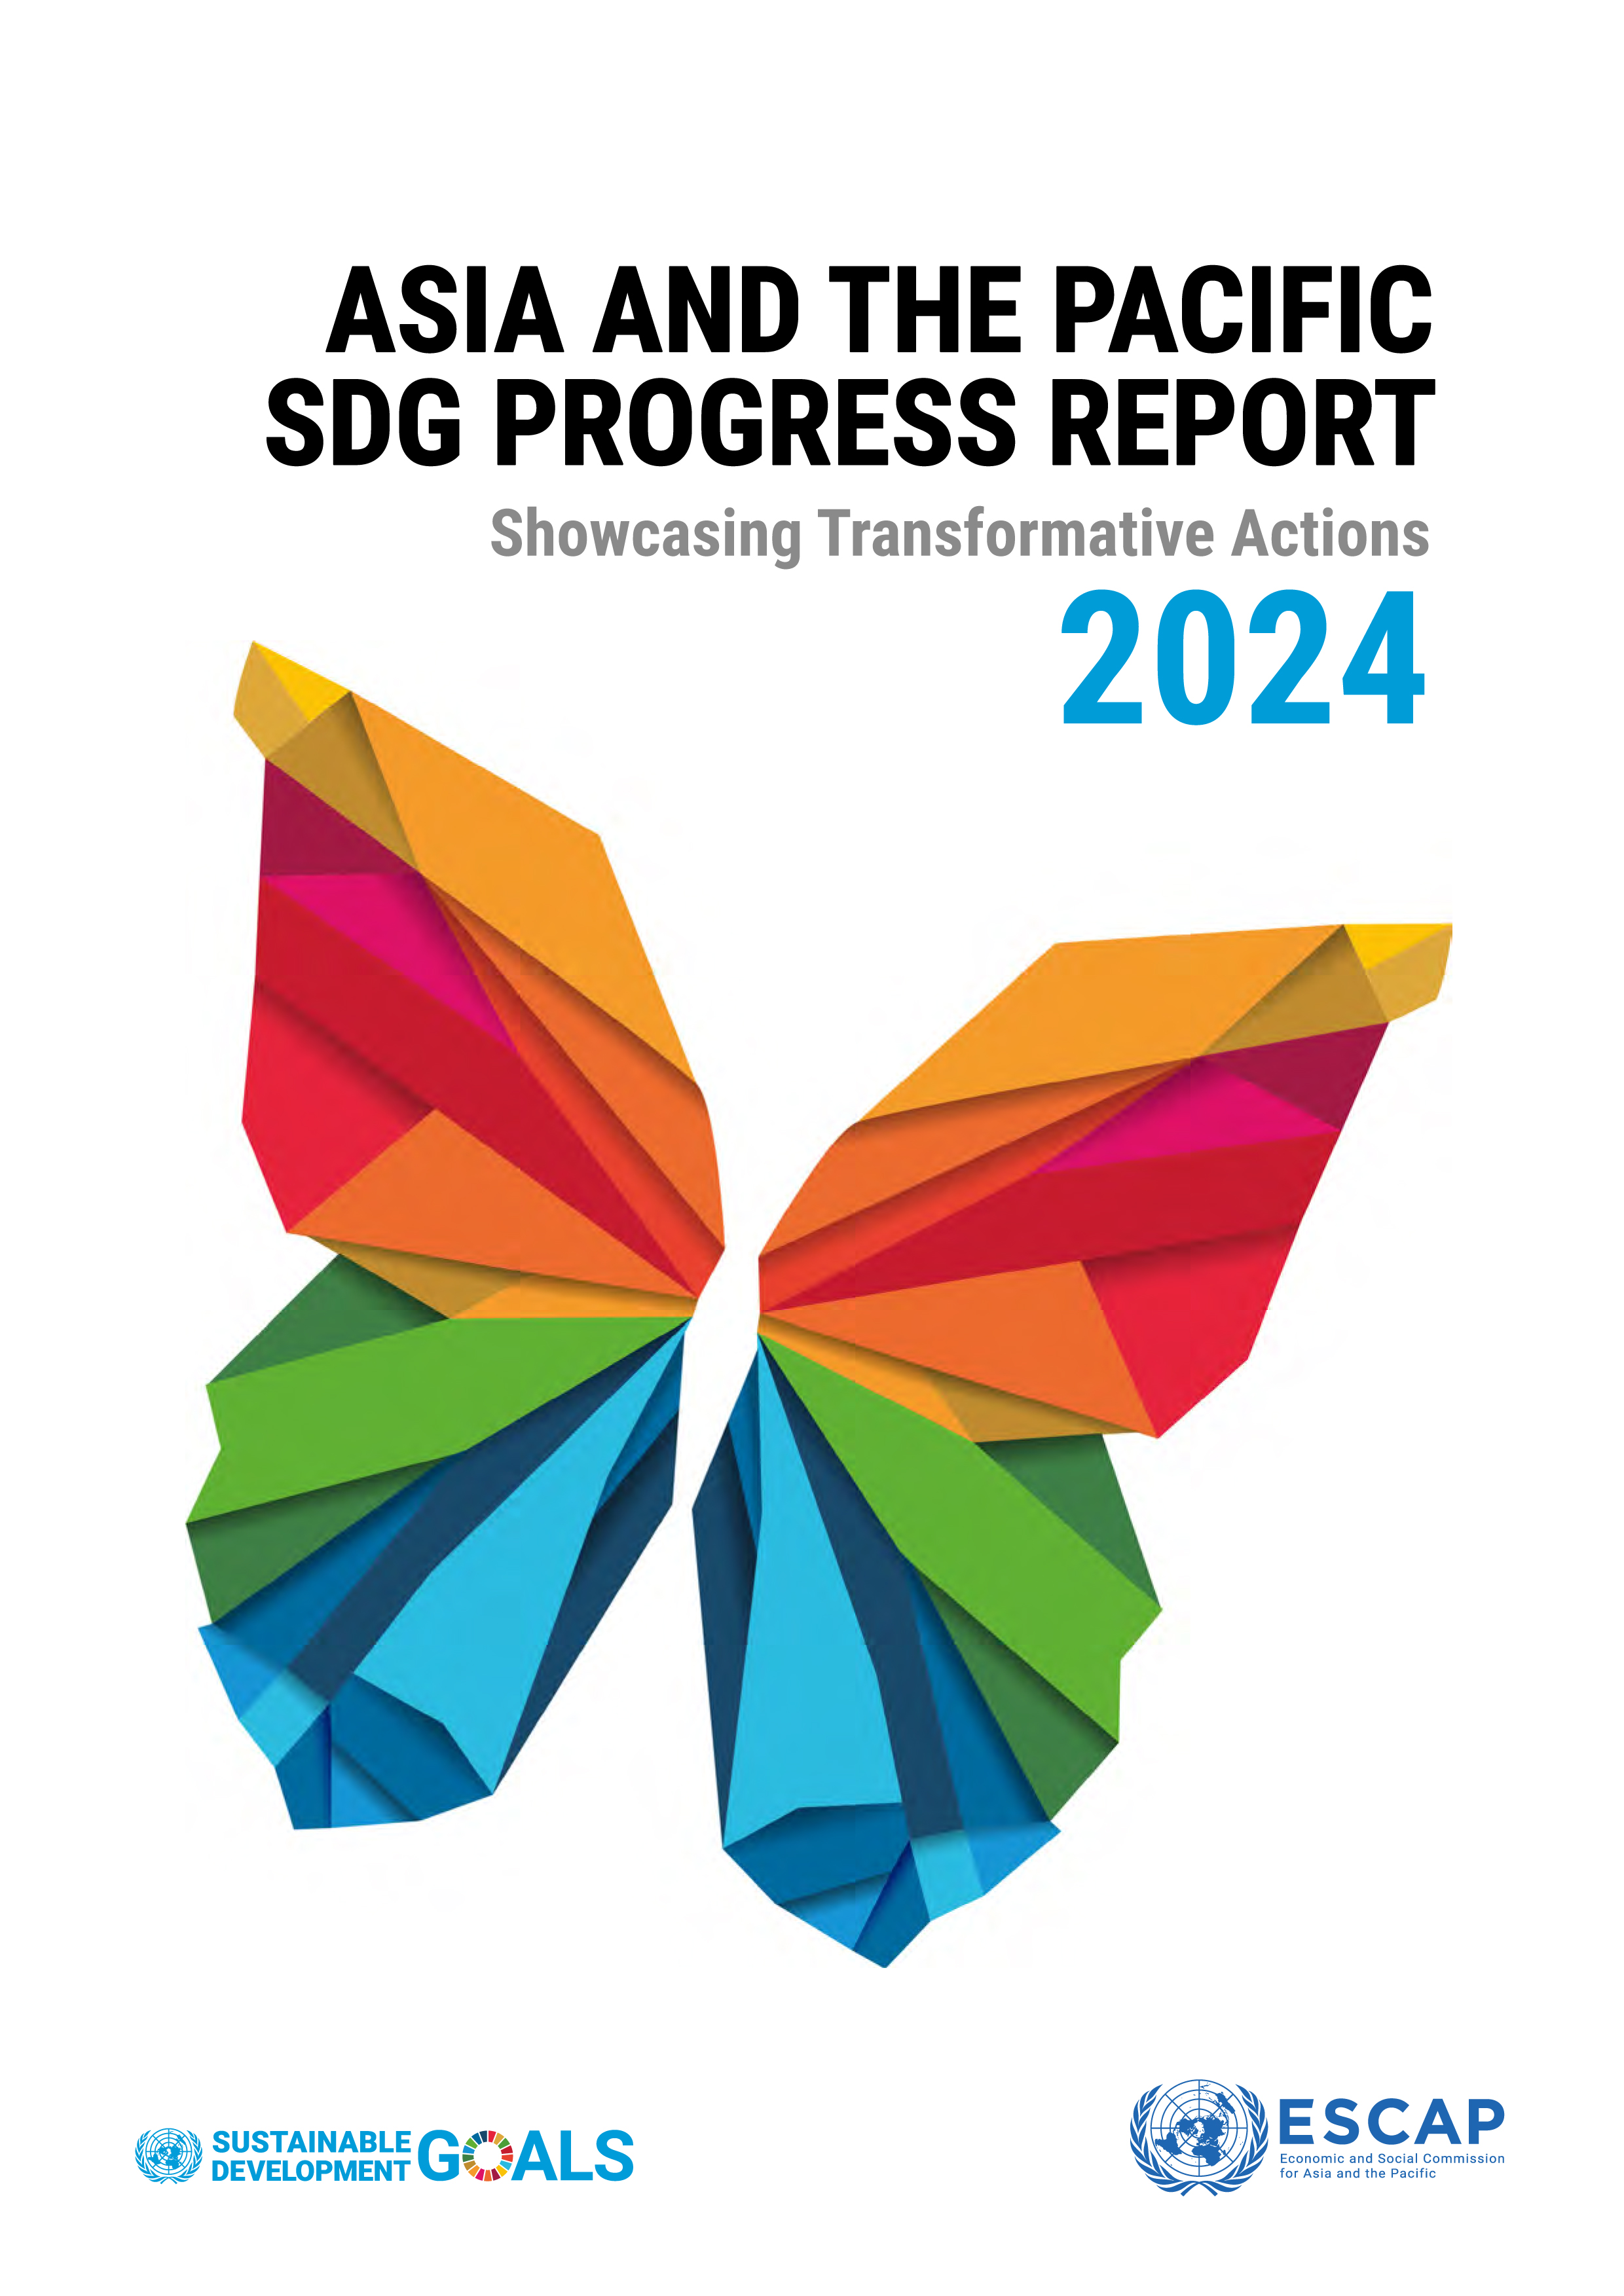 image of Asia and the Pacific SDG Progress Report 2024